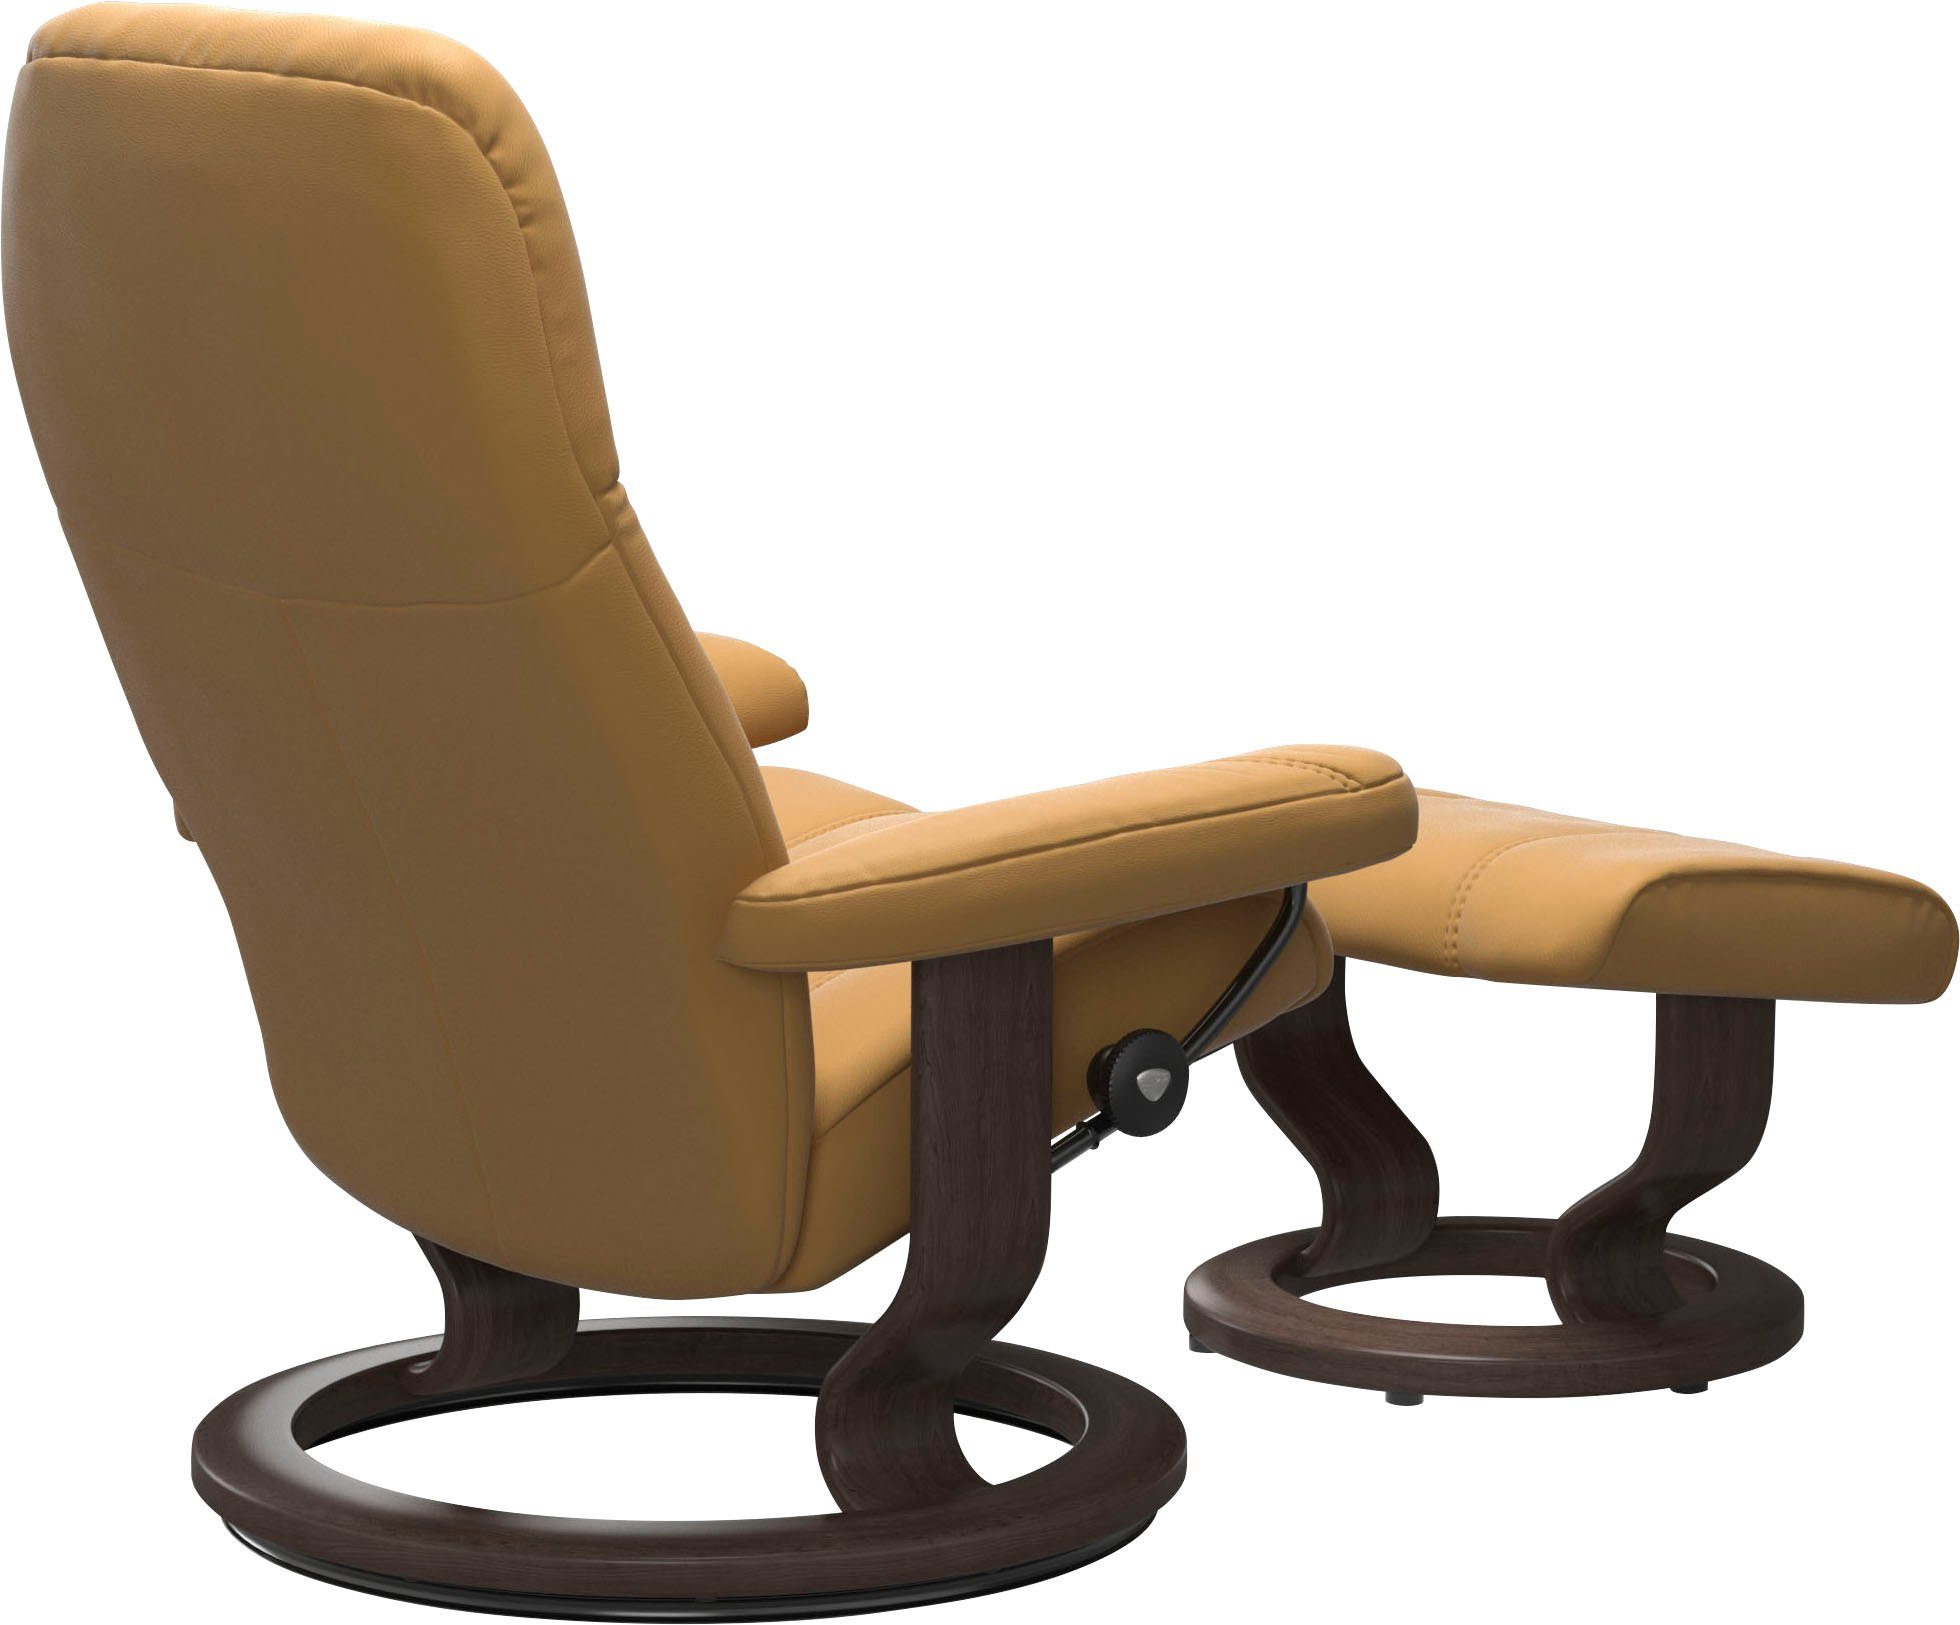 Stressless® Relaxsessel Gestell Größe Classic Consul, Base, mit Wenge M